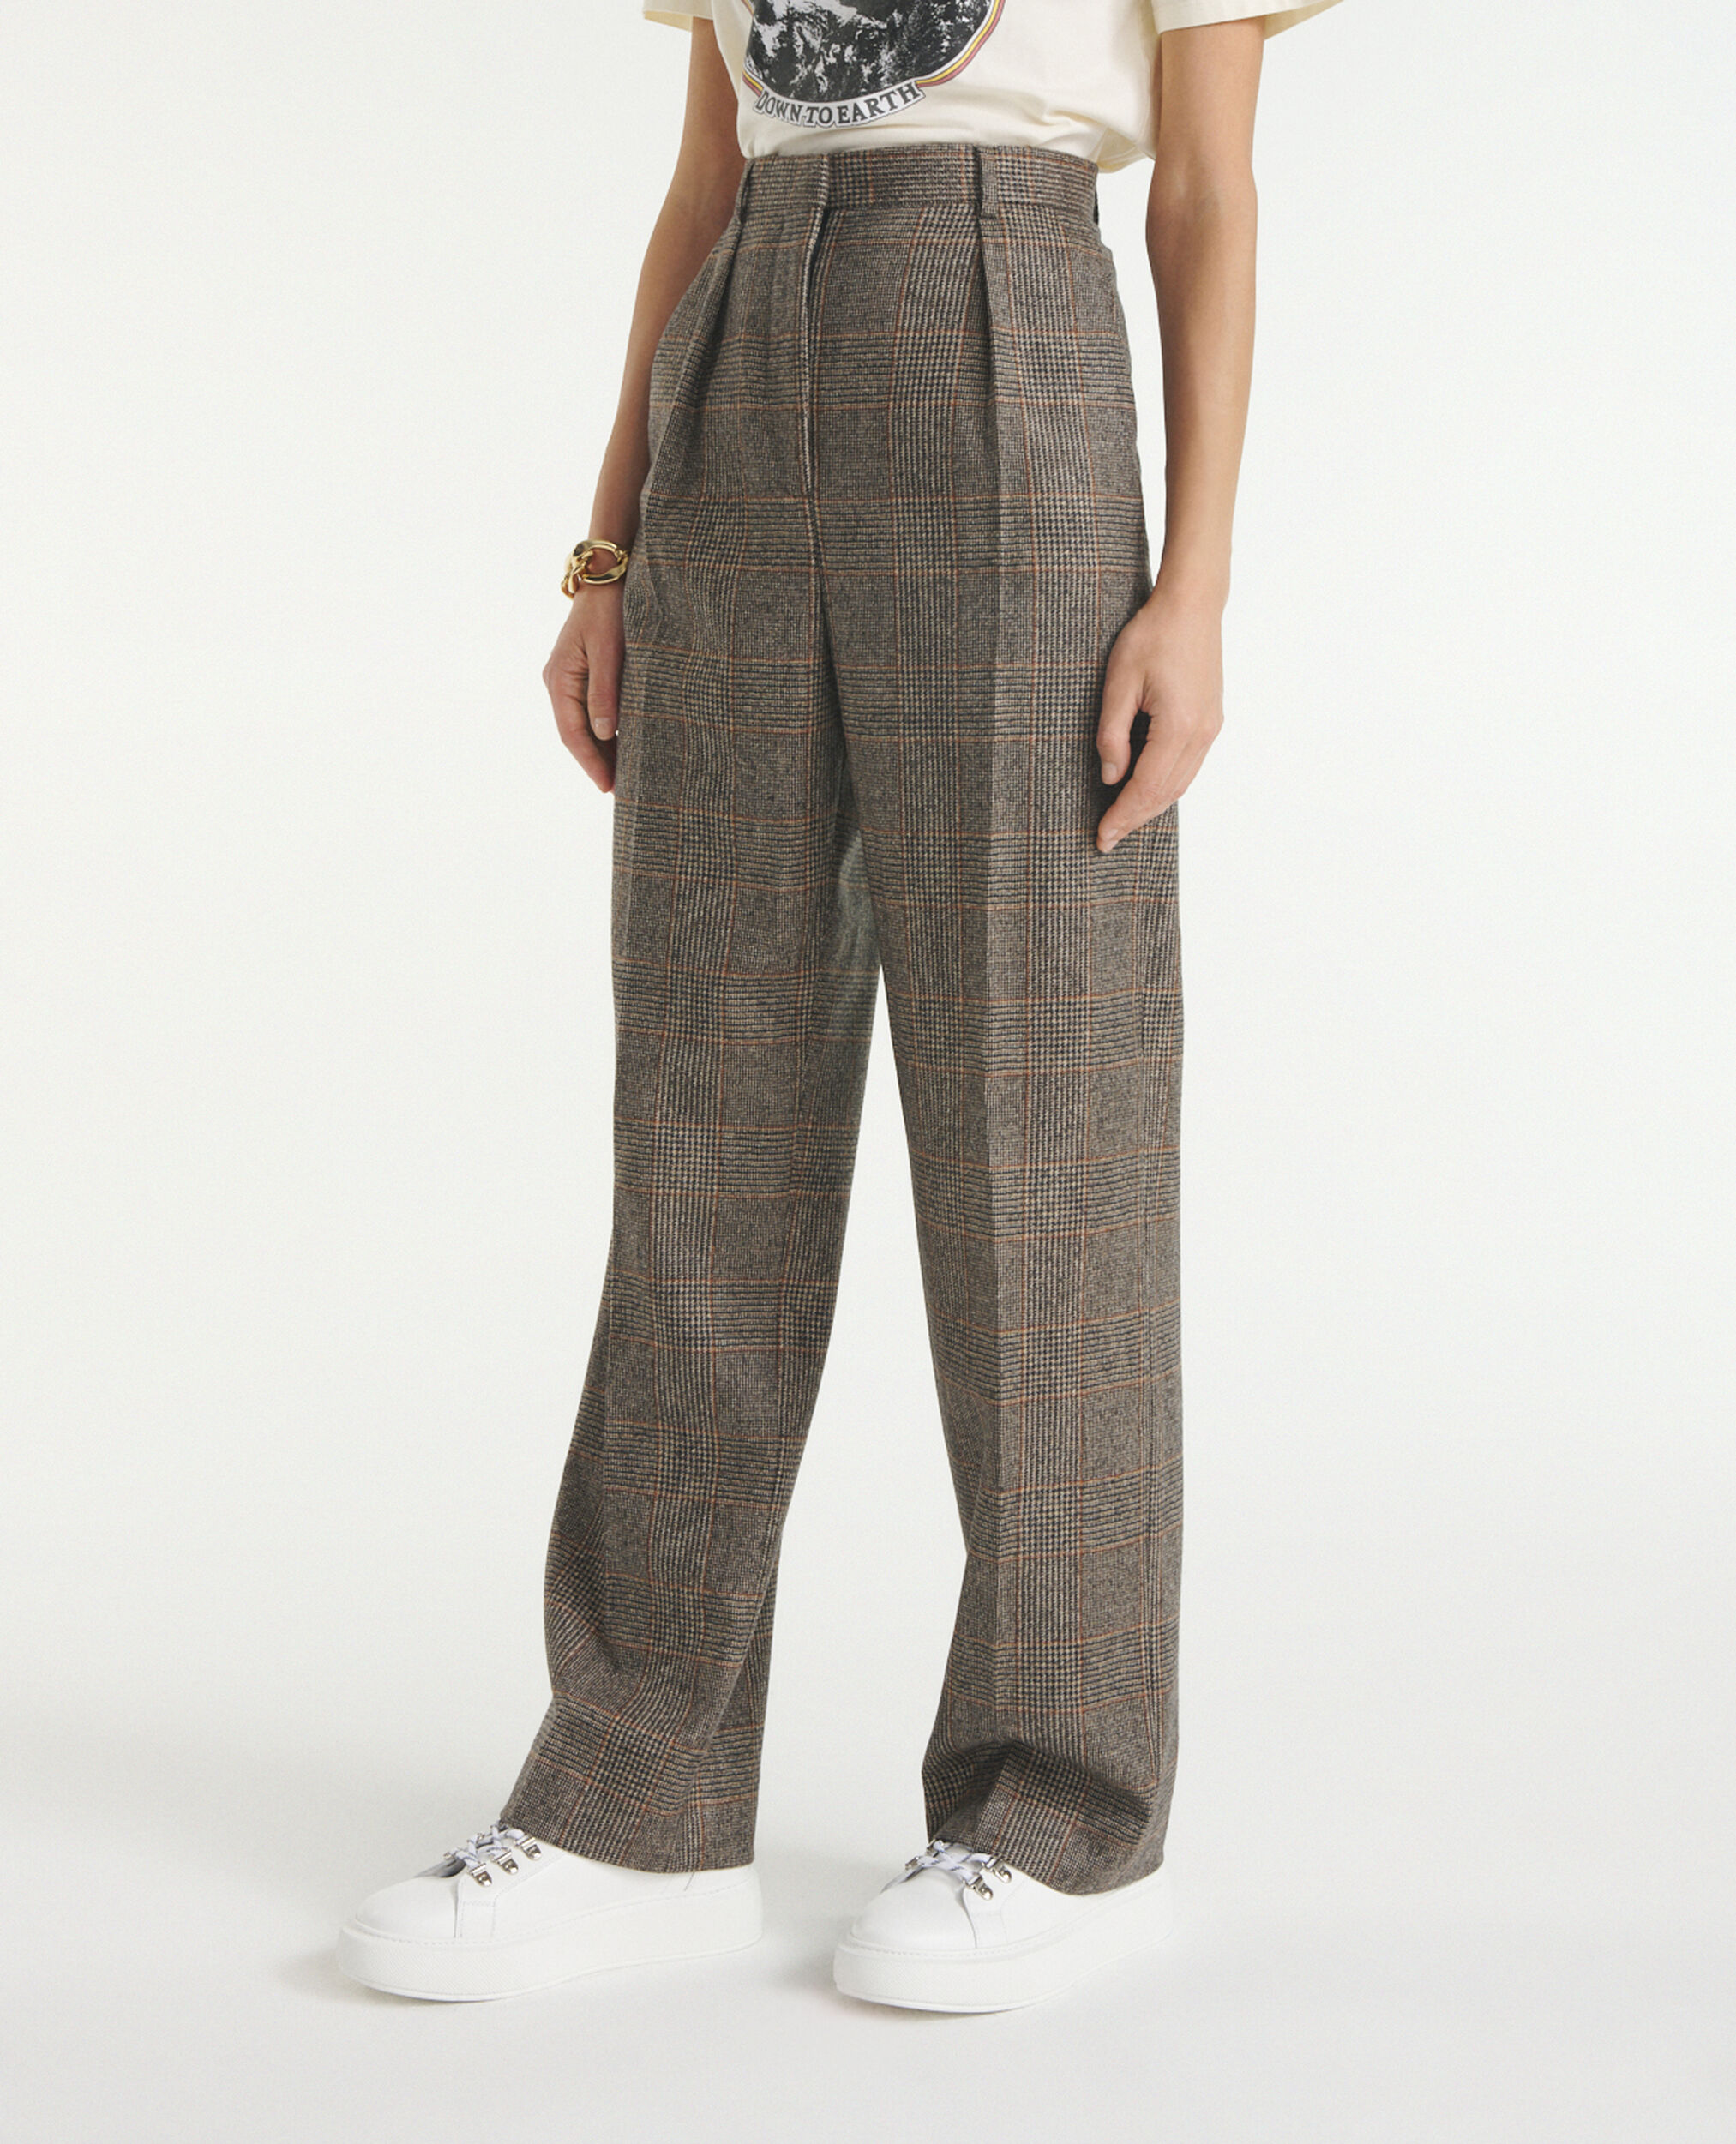 Straight-cut brown wool pants with crease